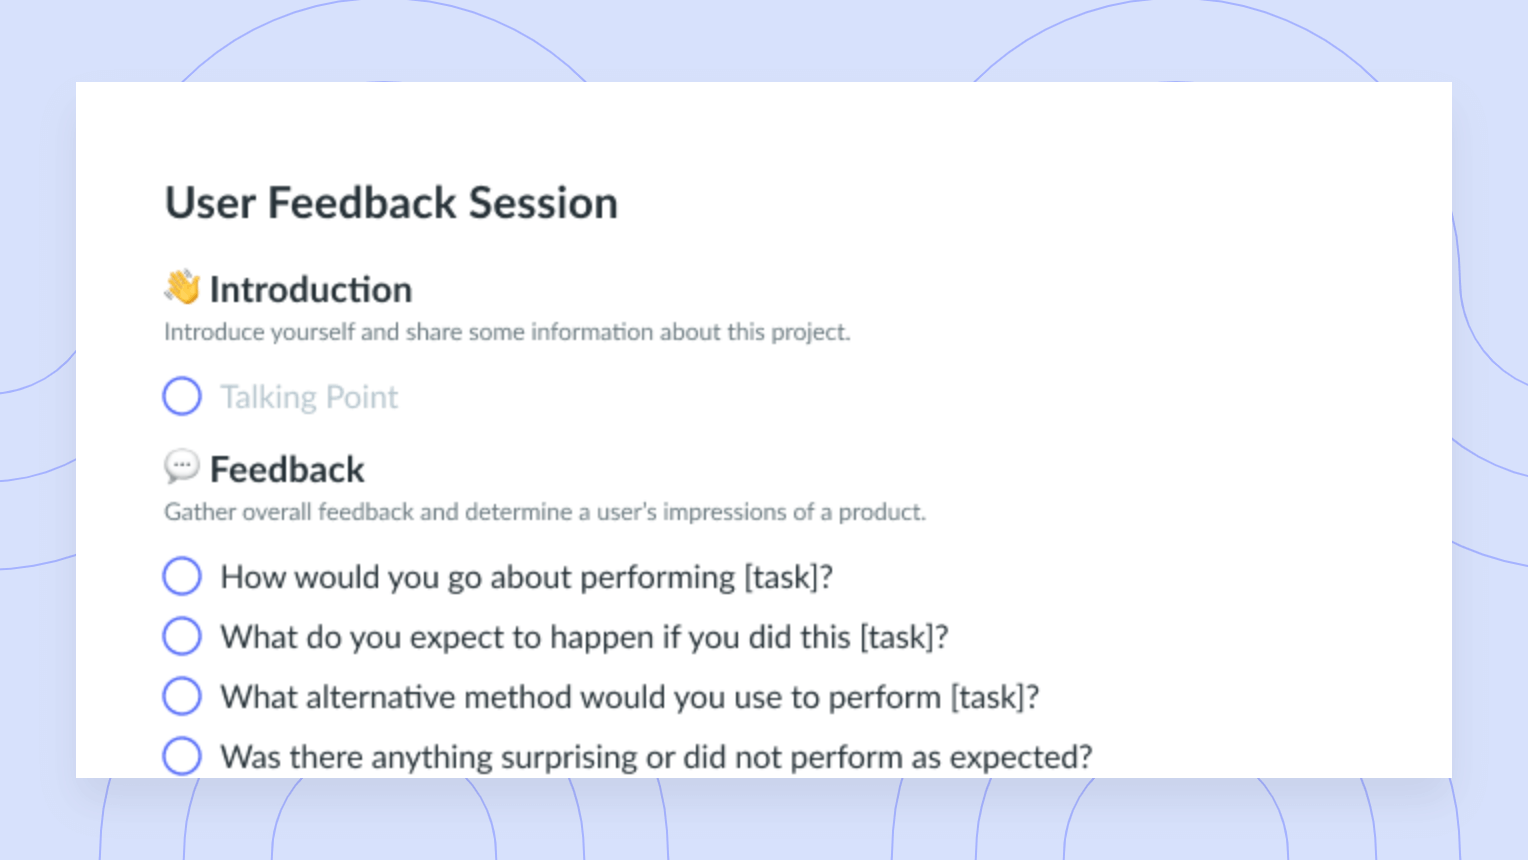 User Feedback Session Template